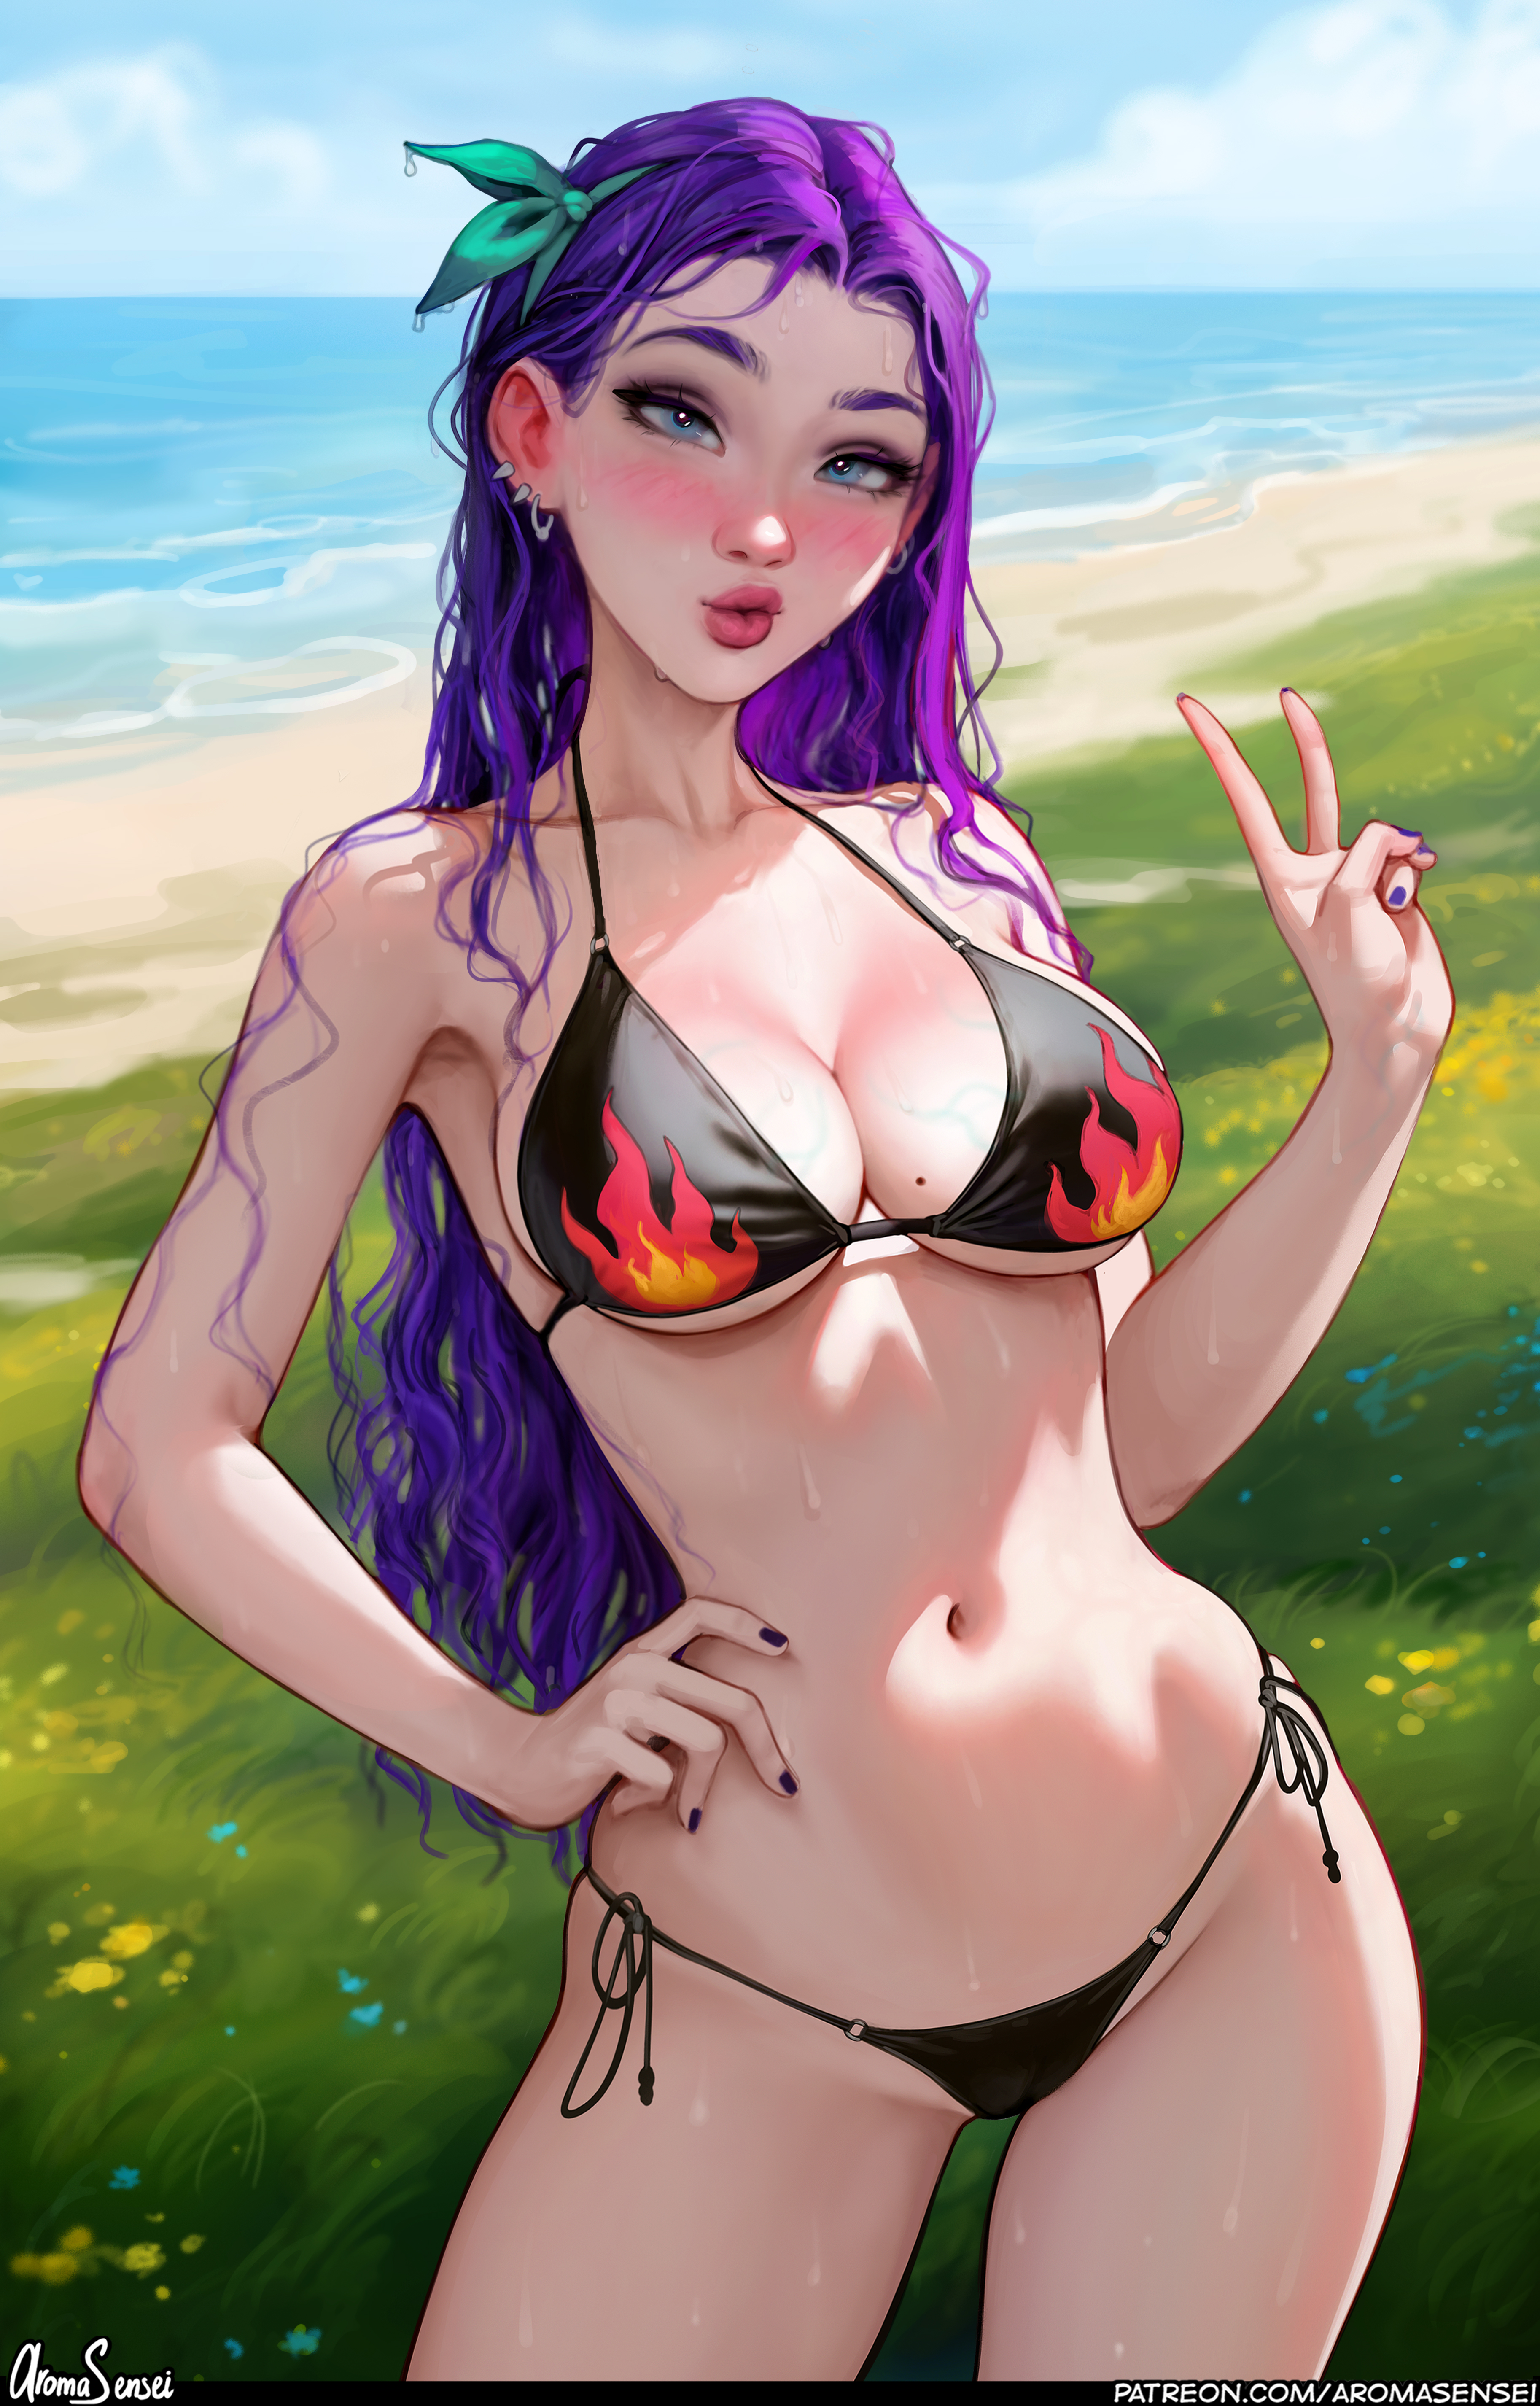 General 3652x5705 Abigail (Stardew Valley) video game girls artwork drawing fan art swimwear Aroma Sensei belly button frontal view standing cleavage hands on hips bikini painted nails wet body wet hair long hair purple hair watermarked women on beach boobs Stardew Valley sunlight video games slim body juicy lips collarbone water ear piercing skinny hips grass outdoors women outdoors peace sign portrait display looking at viewer blushing victory sign